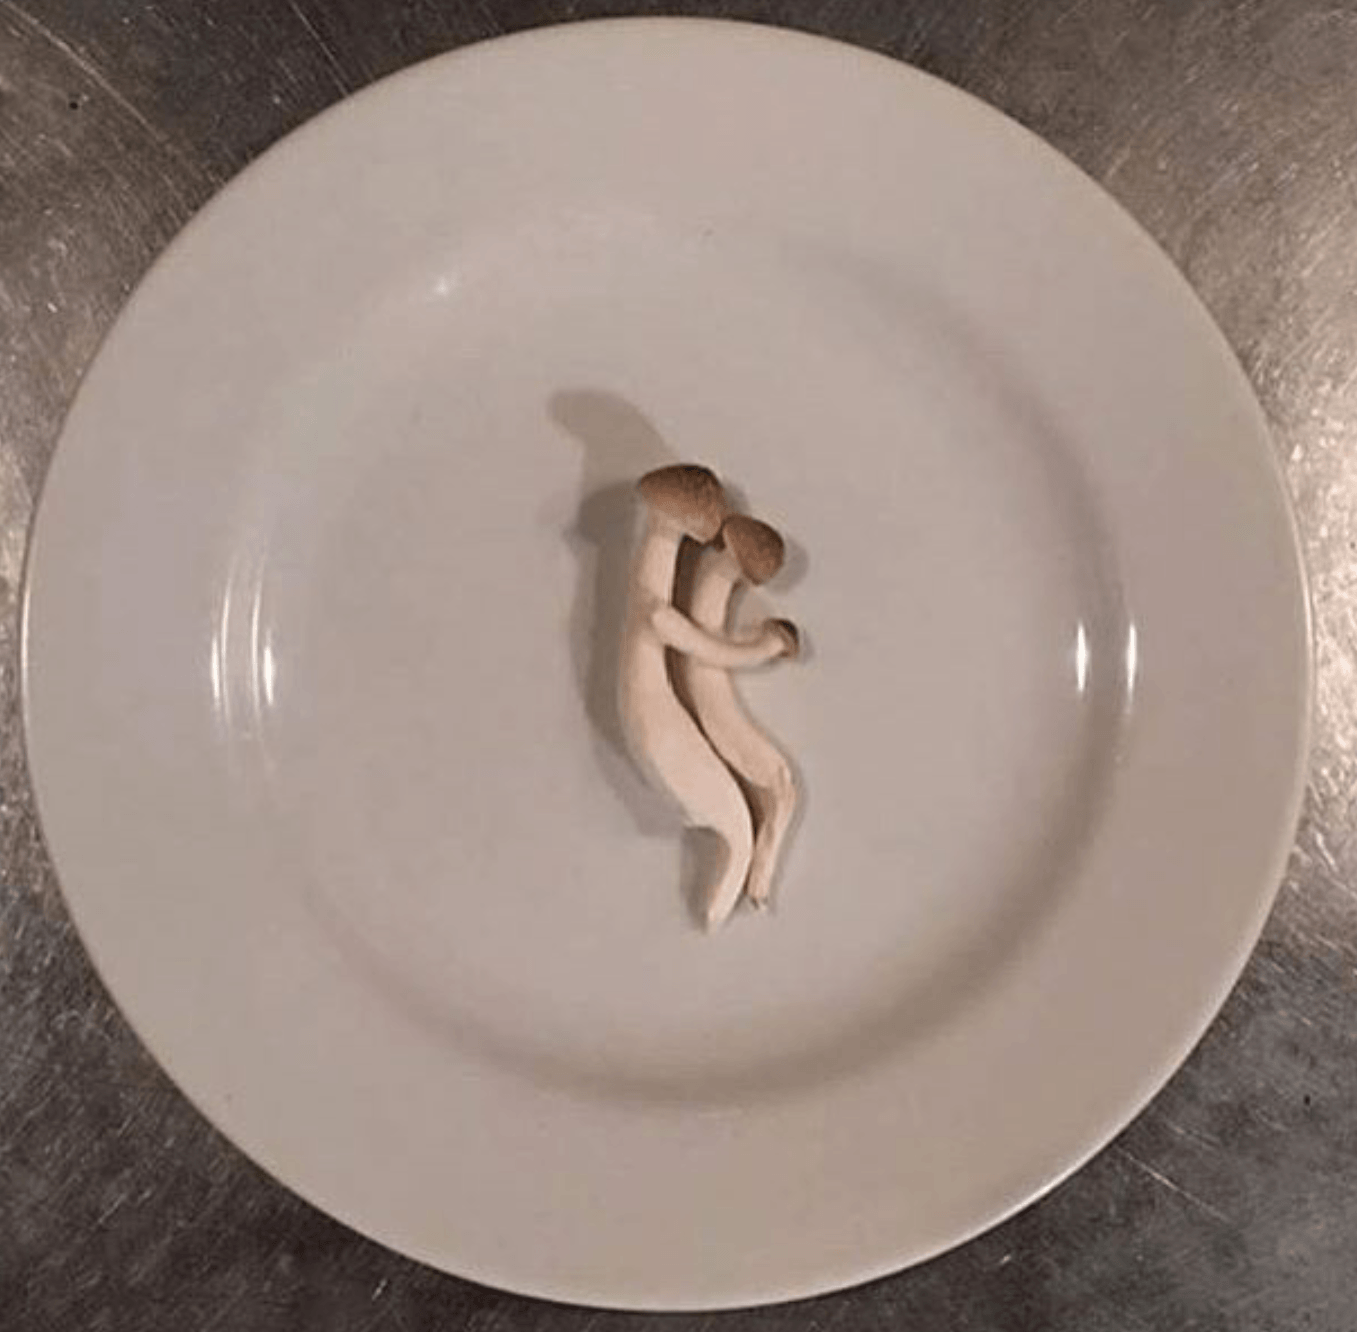 These mushrooms that are in a more intimate relationship than I am